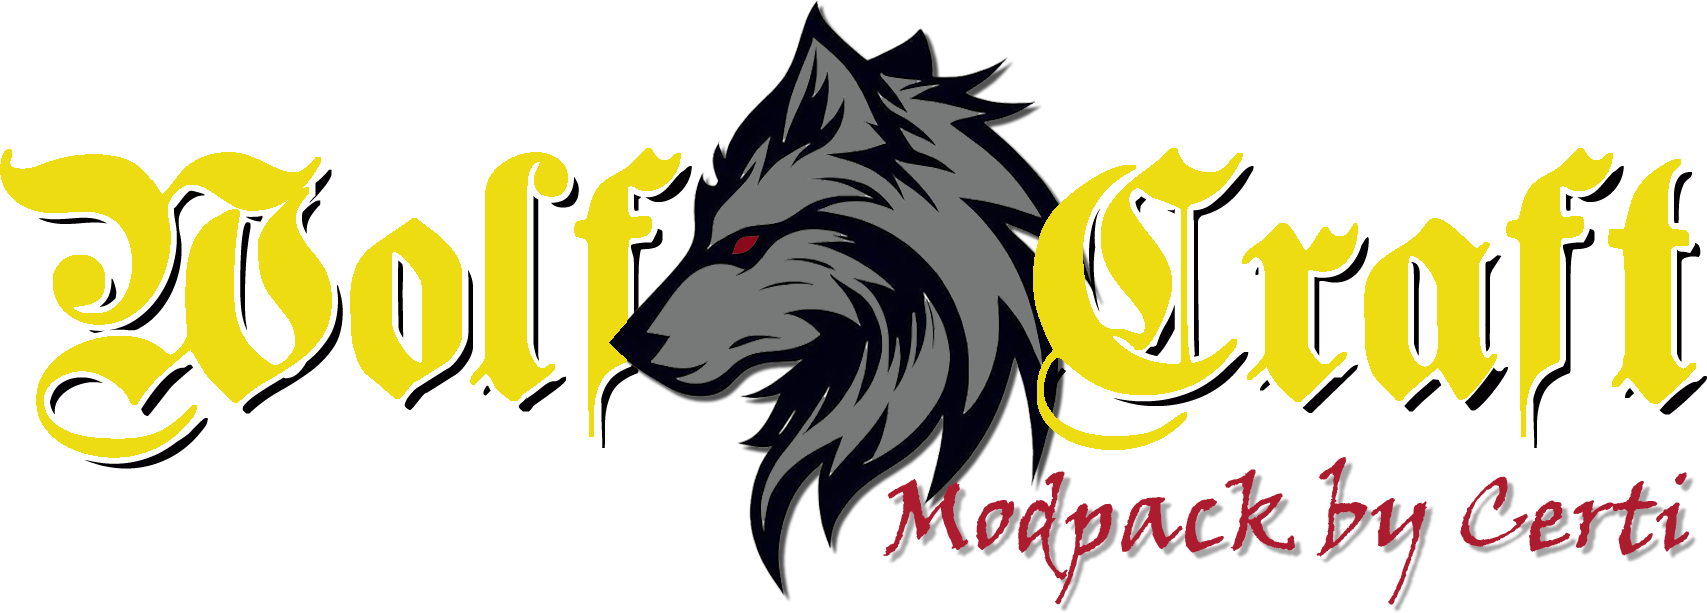 Welcome to WolfCraft!